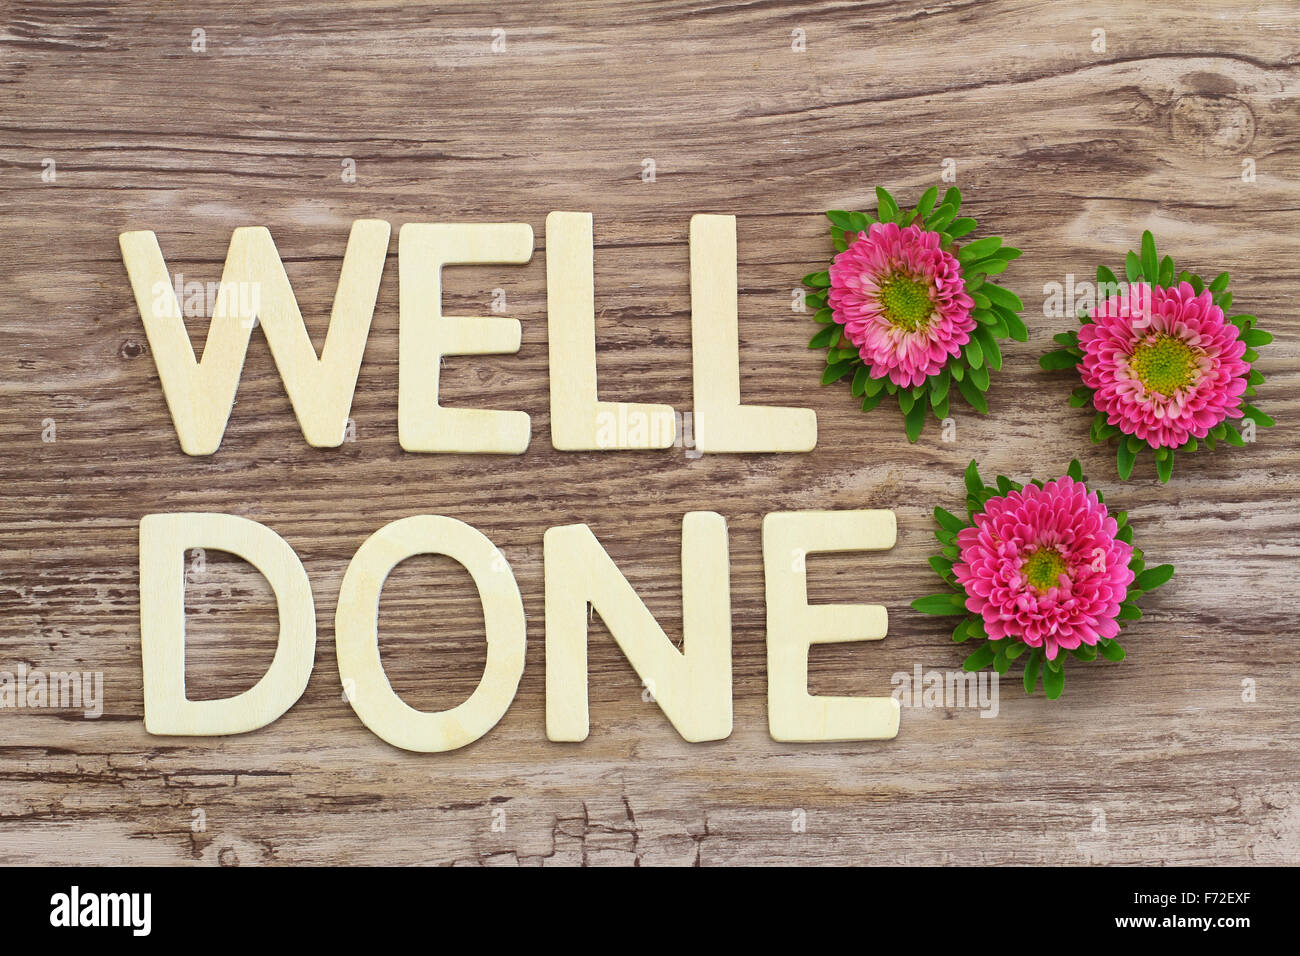 Well done written with wooden letters and pink daisy flowers Stock Photo